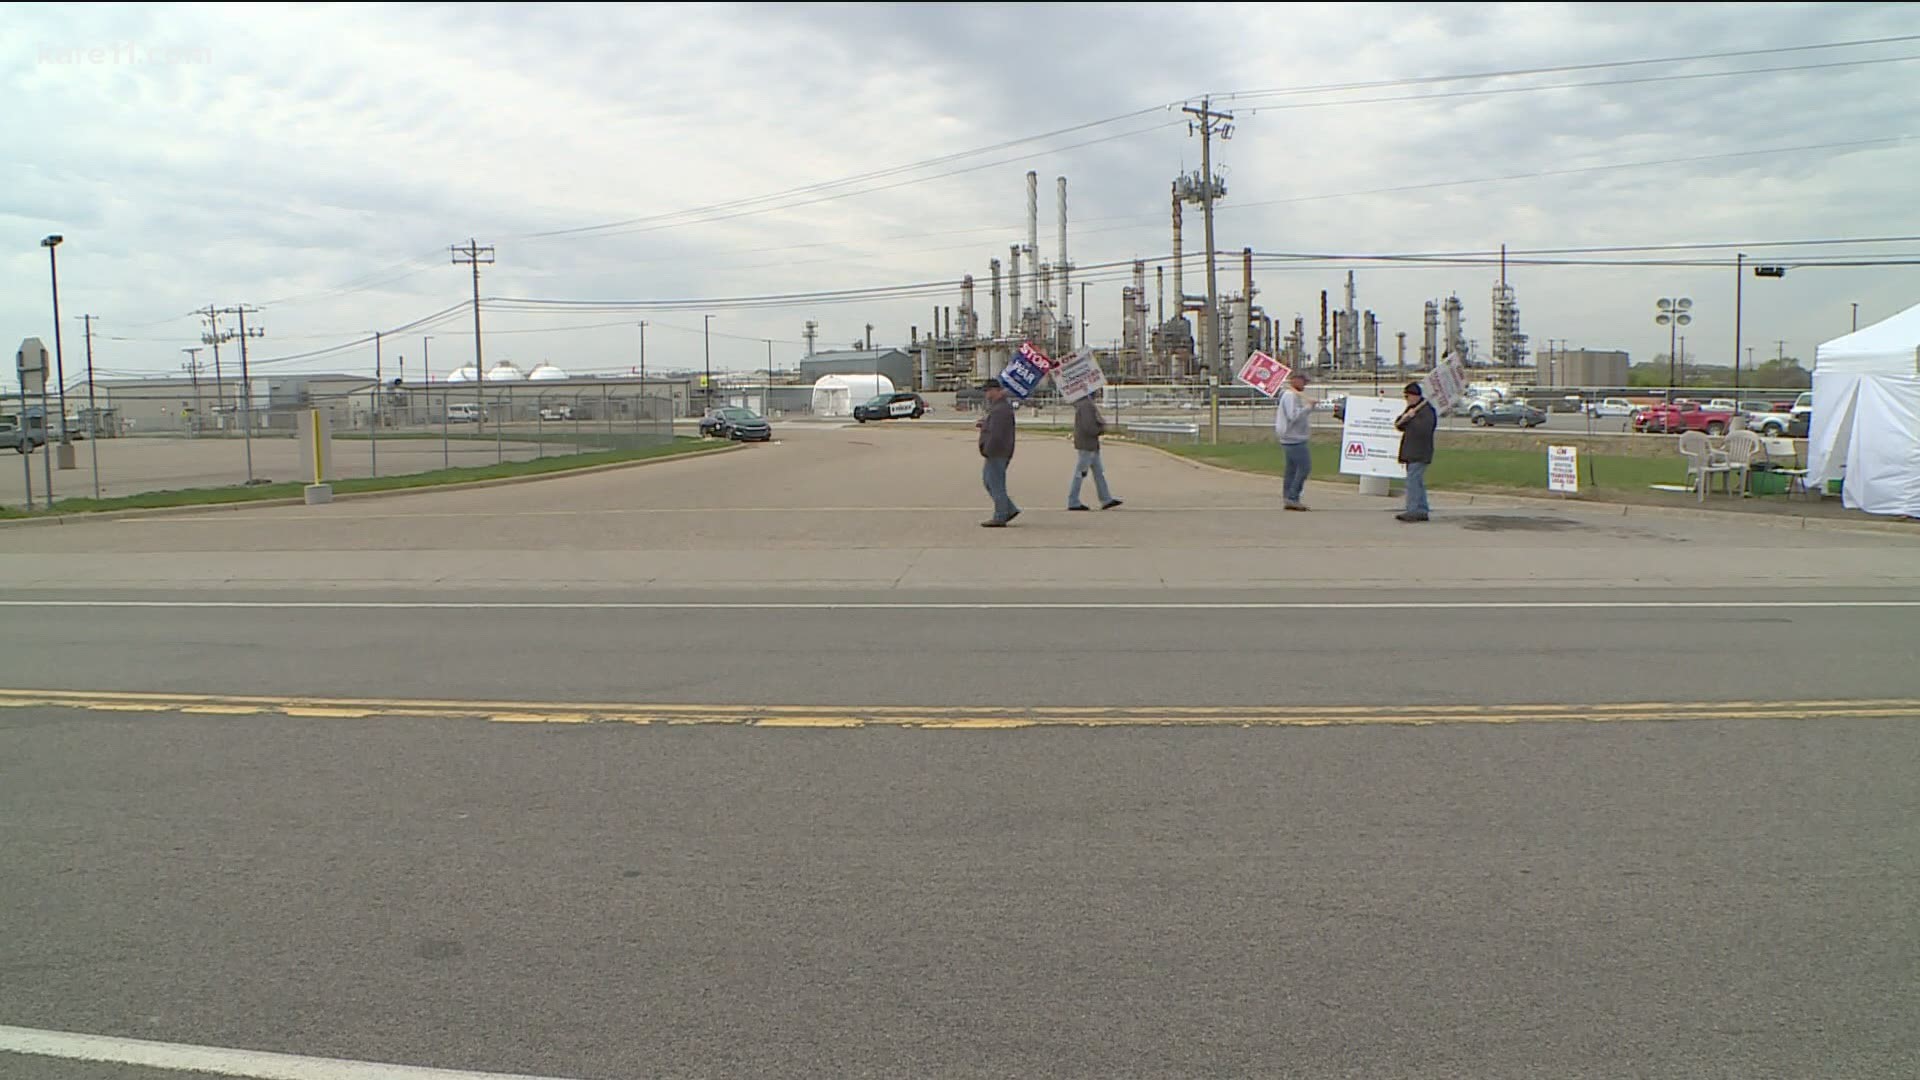 Union workers who've been locked out of the Marathon Refinery in St. Paul Park say they're worried about potential safety hazards.